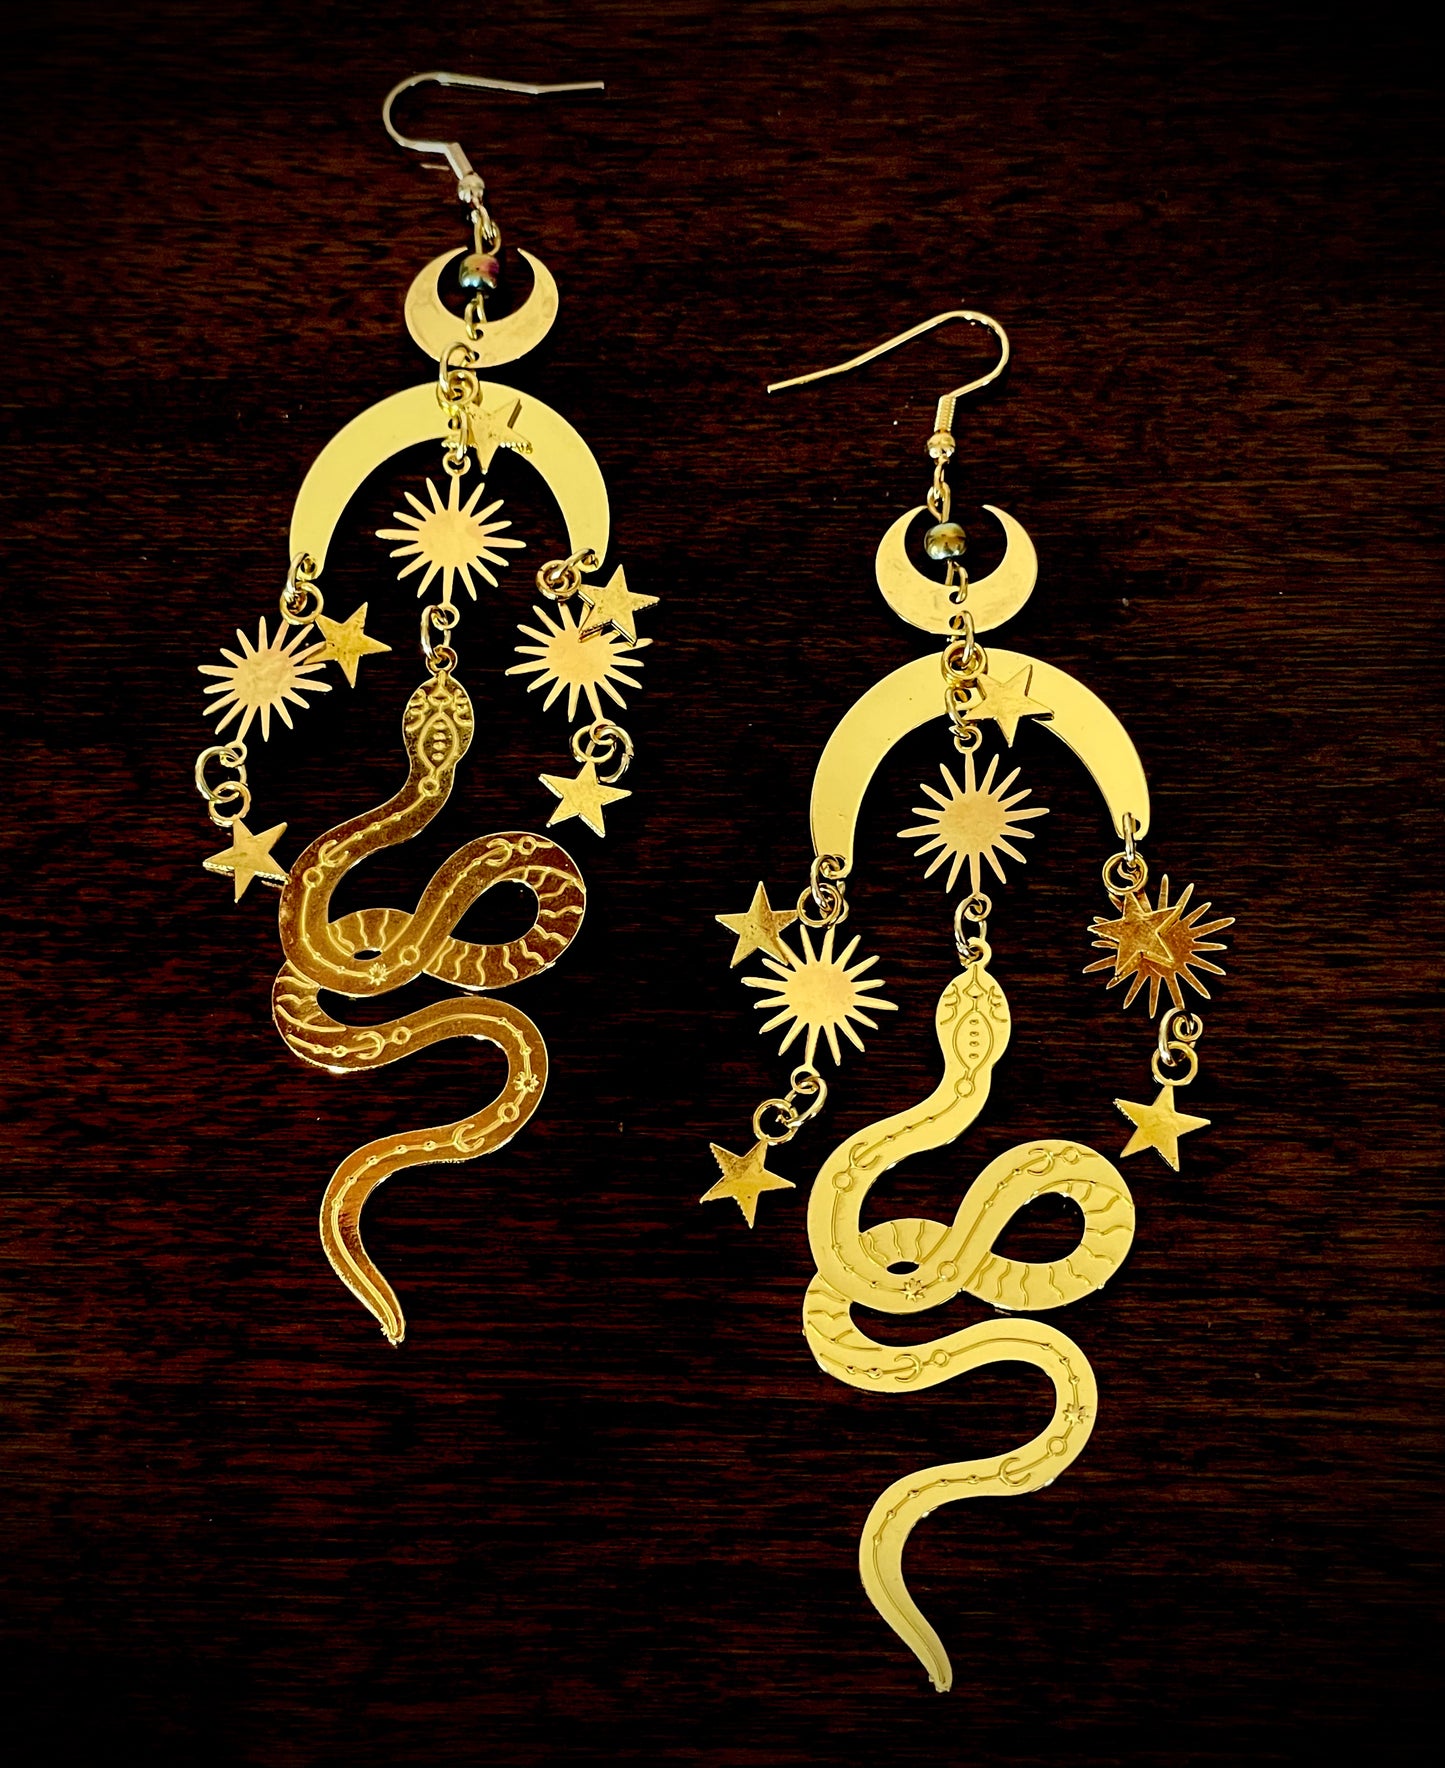 Mystical Star and Snake Crescent Moon Bangle Earrings